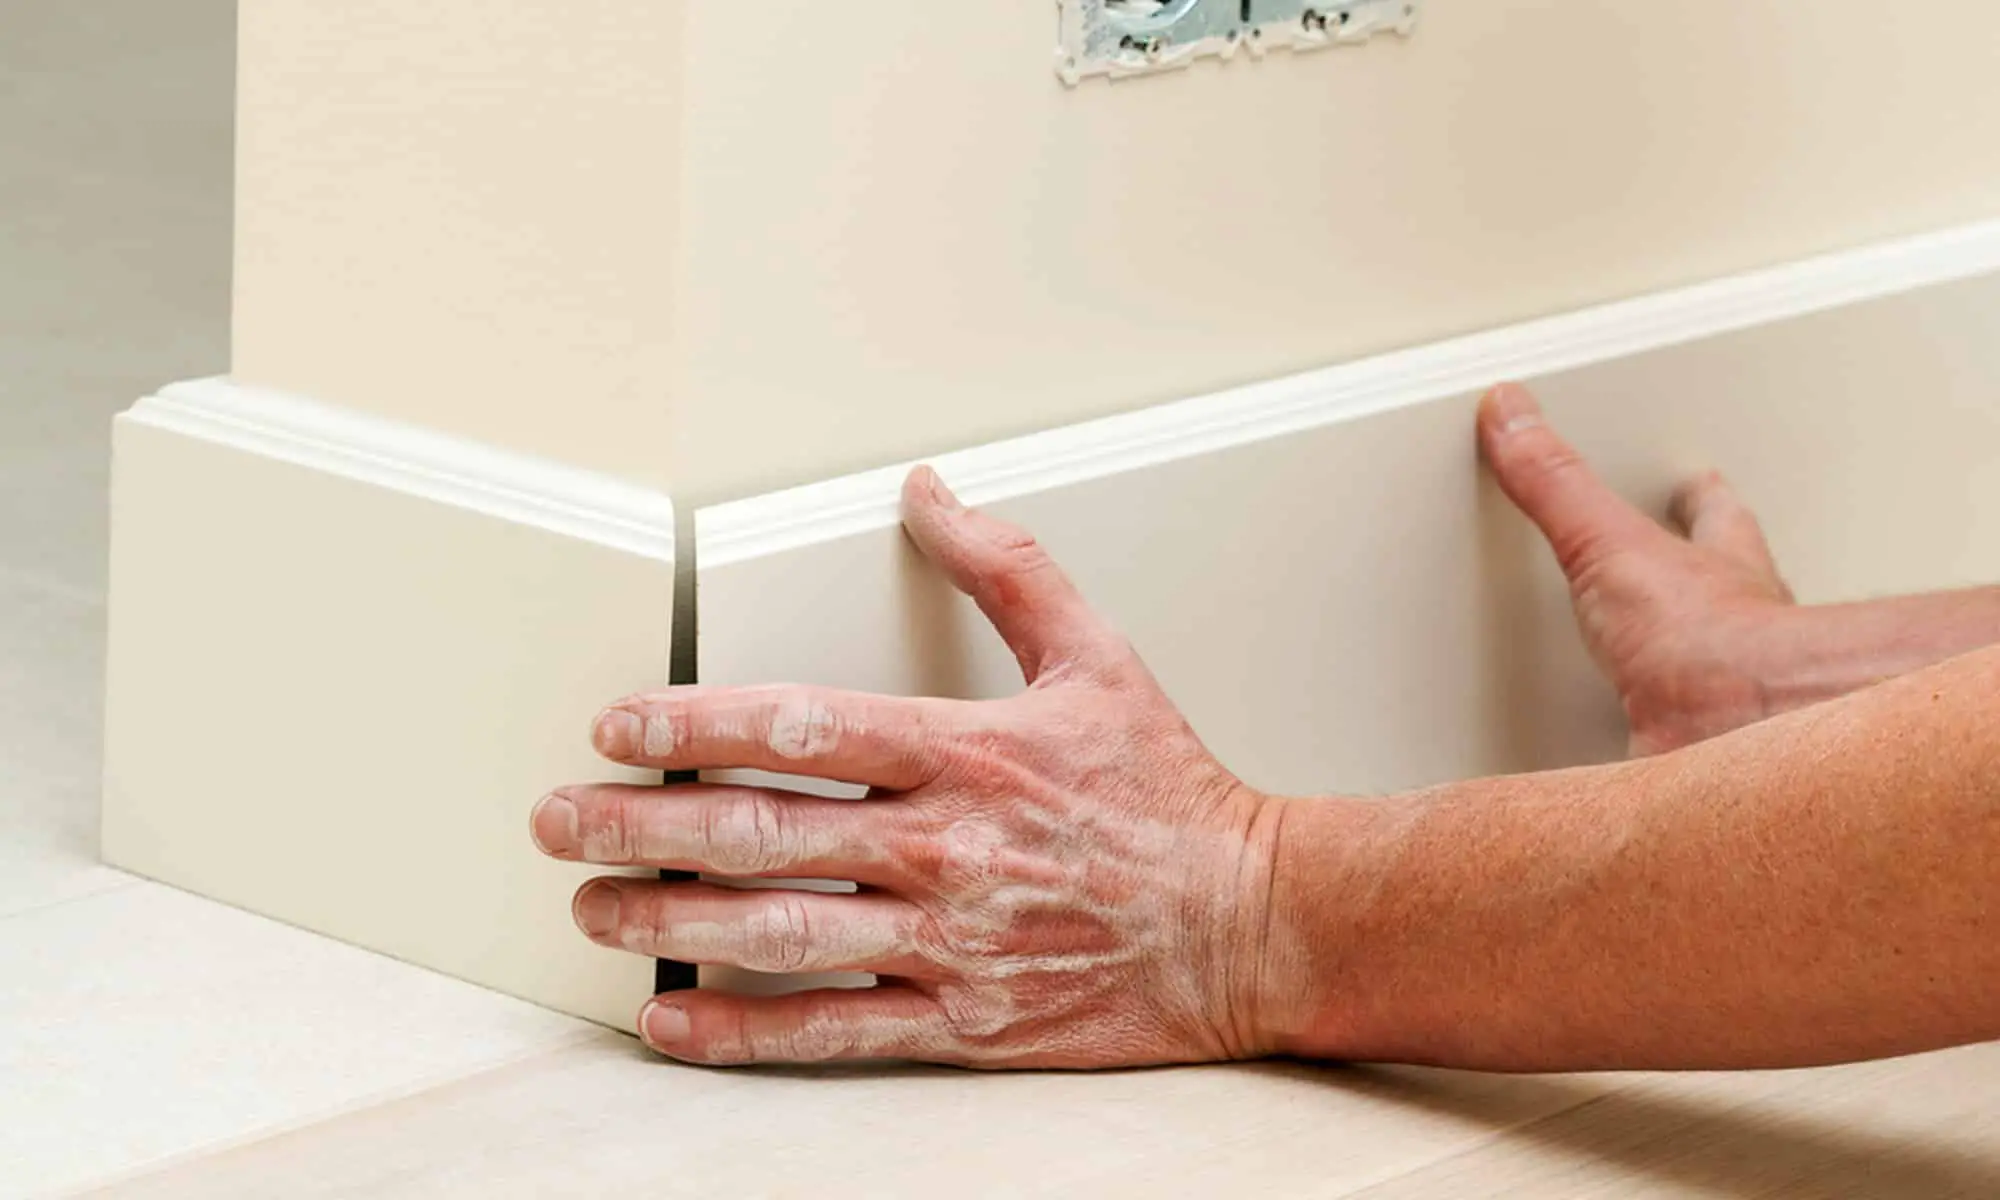 How To Make Your Own Baseboards